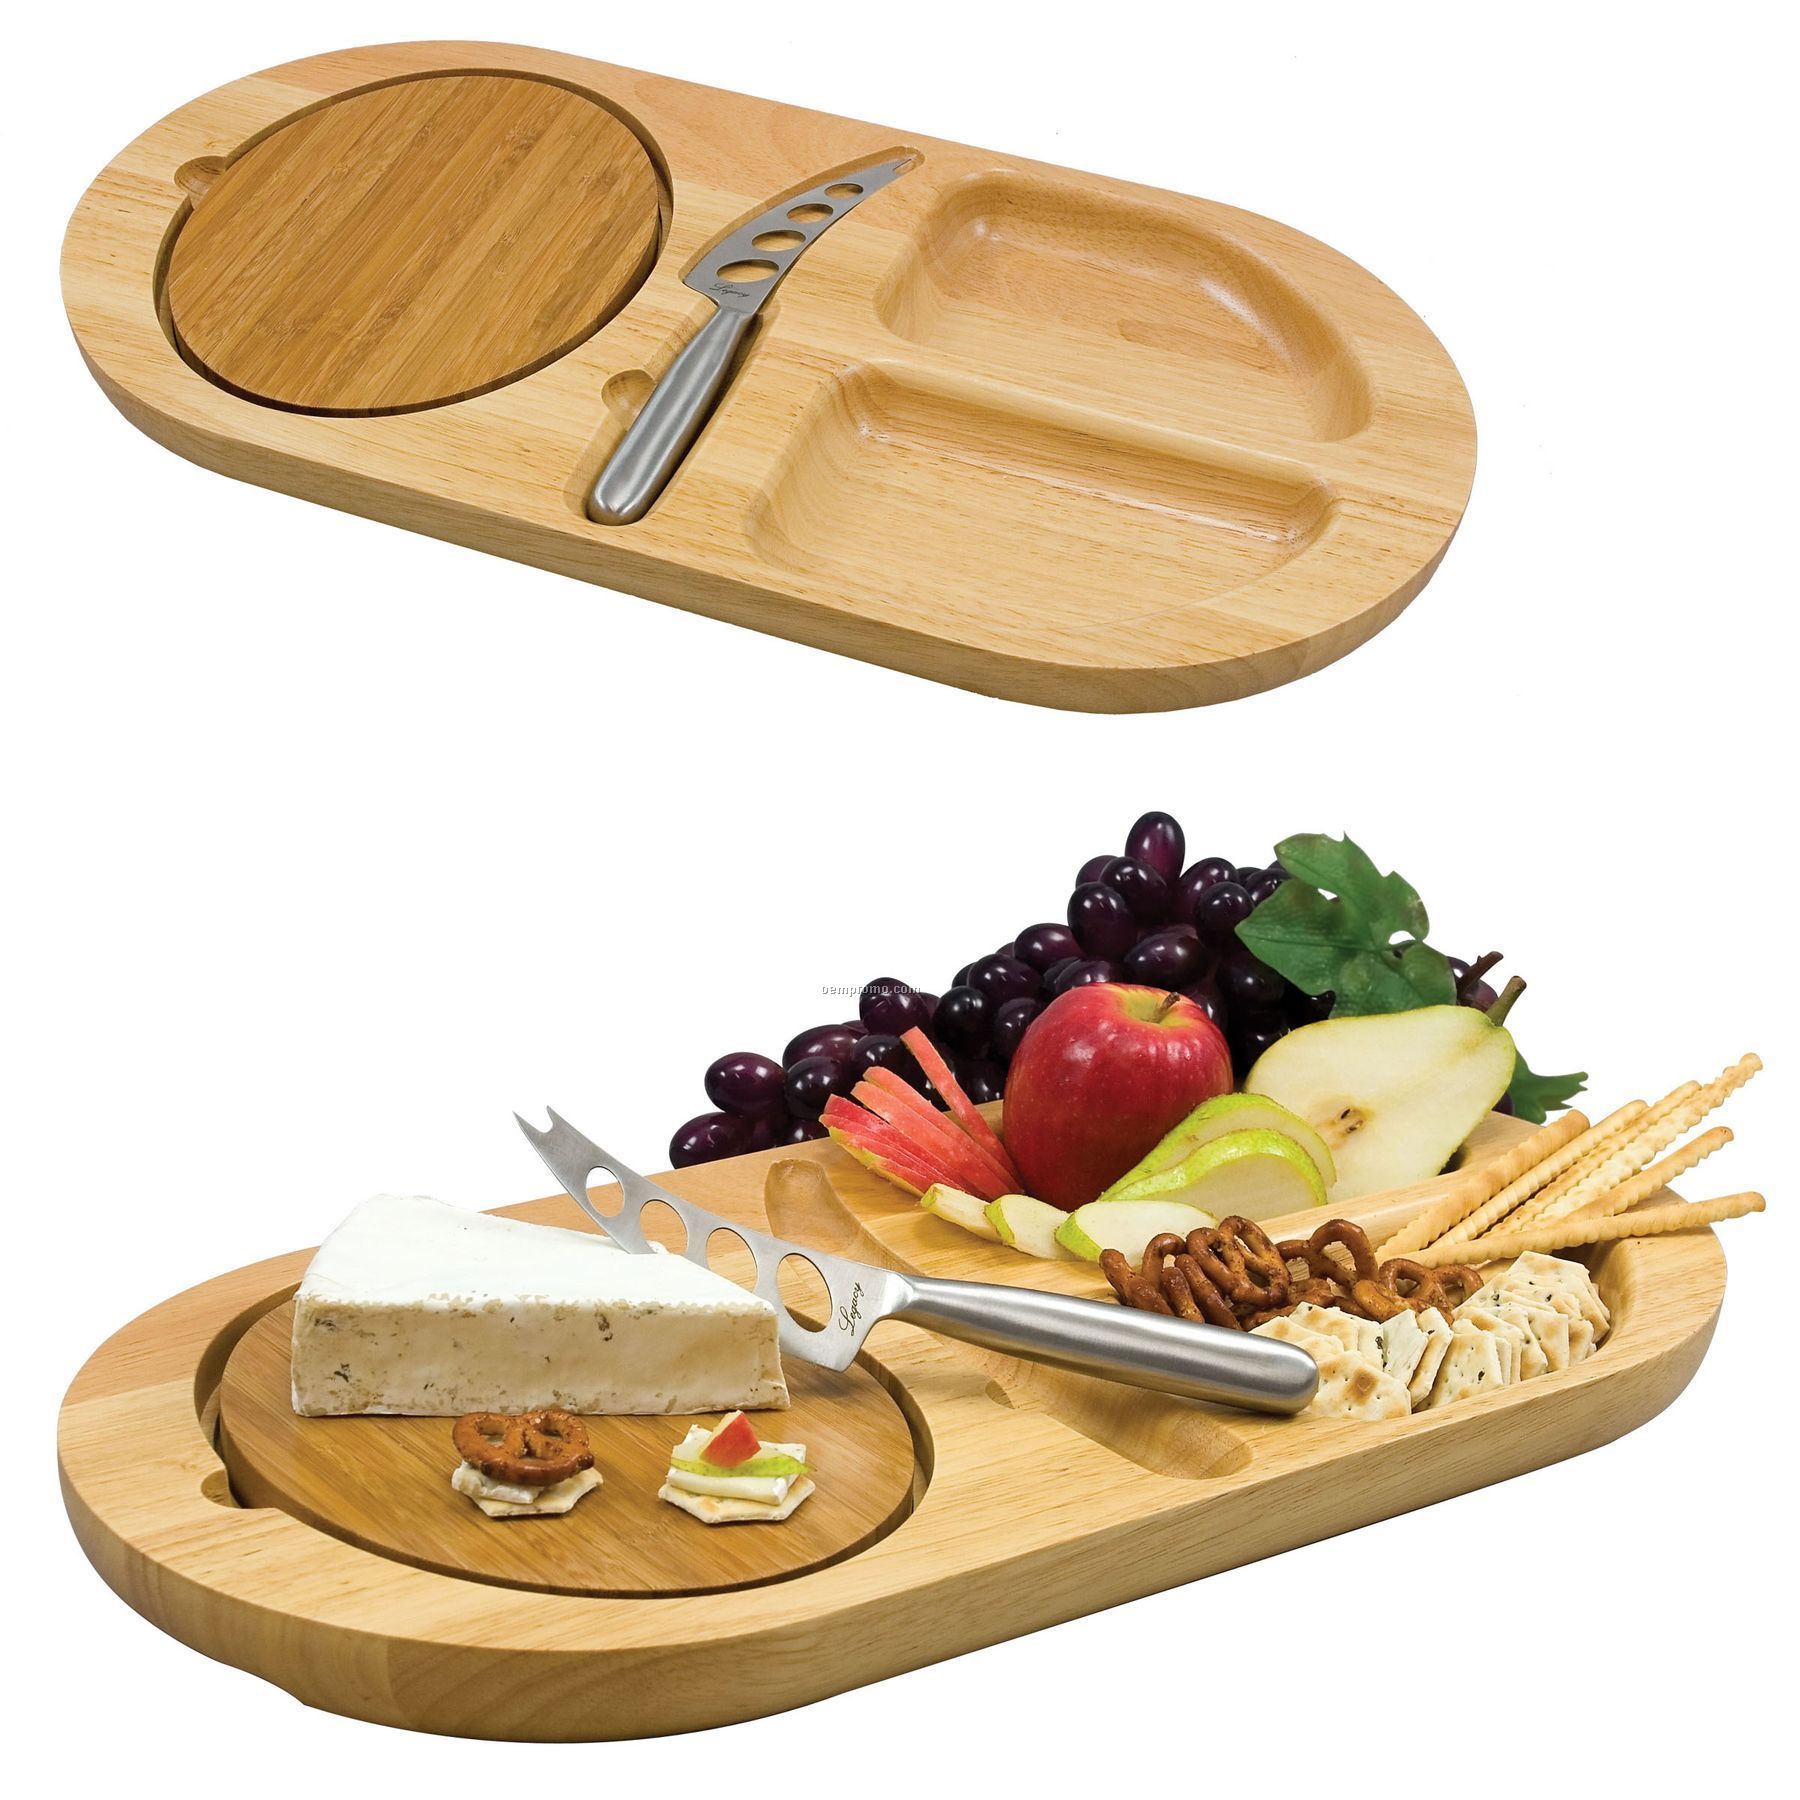 Fontina Oval Wood Serving Tray W/ 2 Carved Moats & Removable Cutting Board